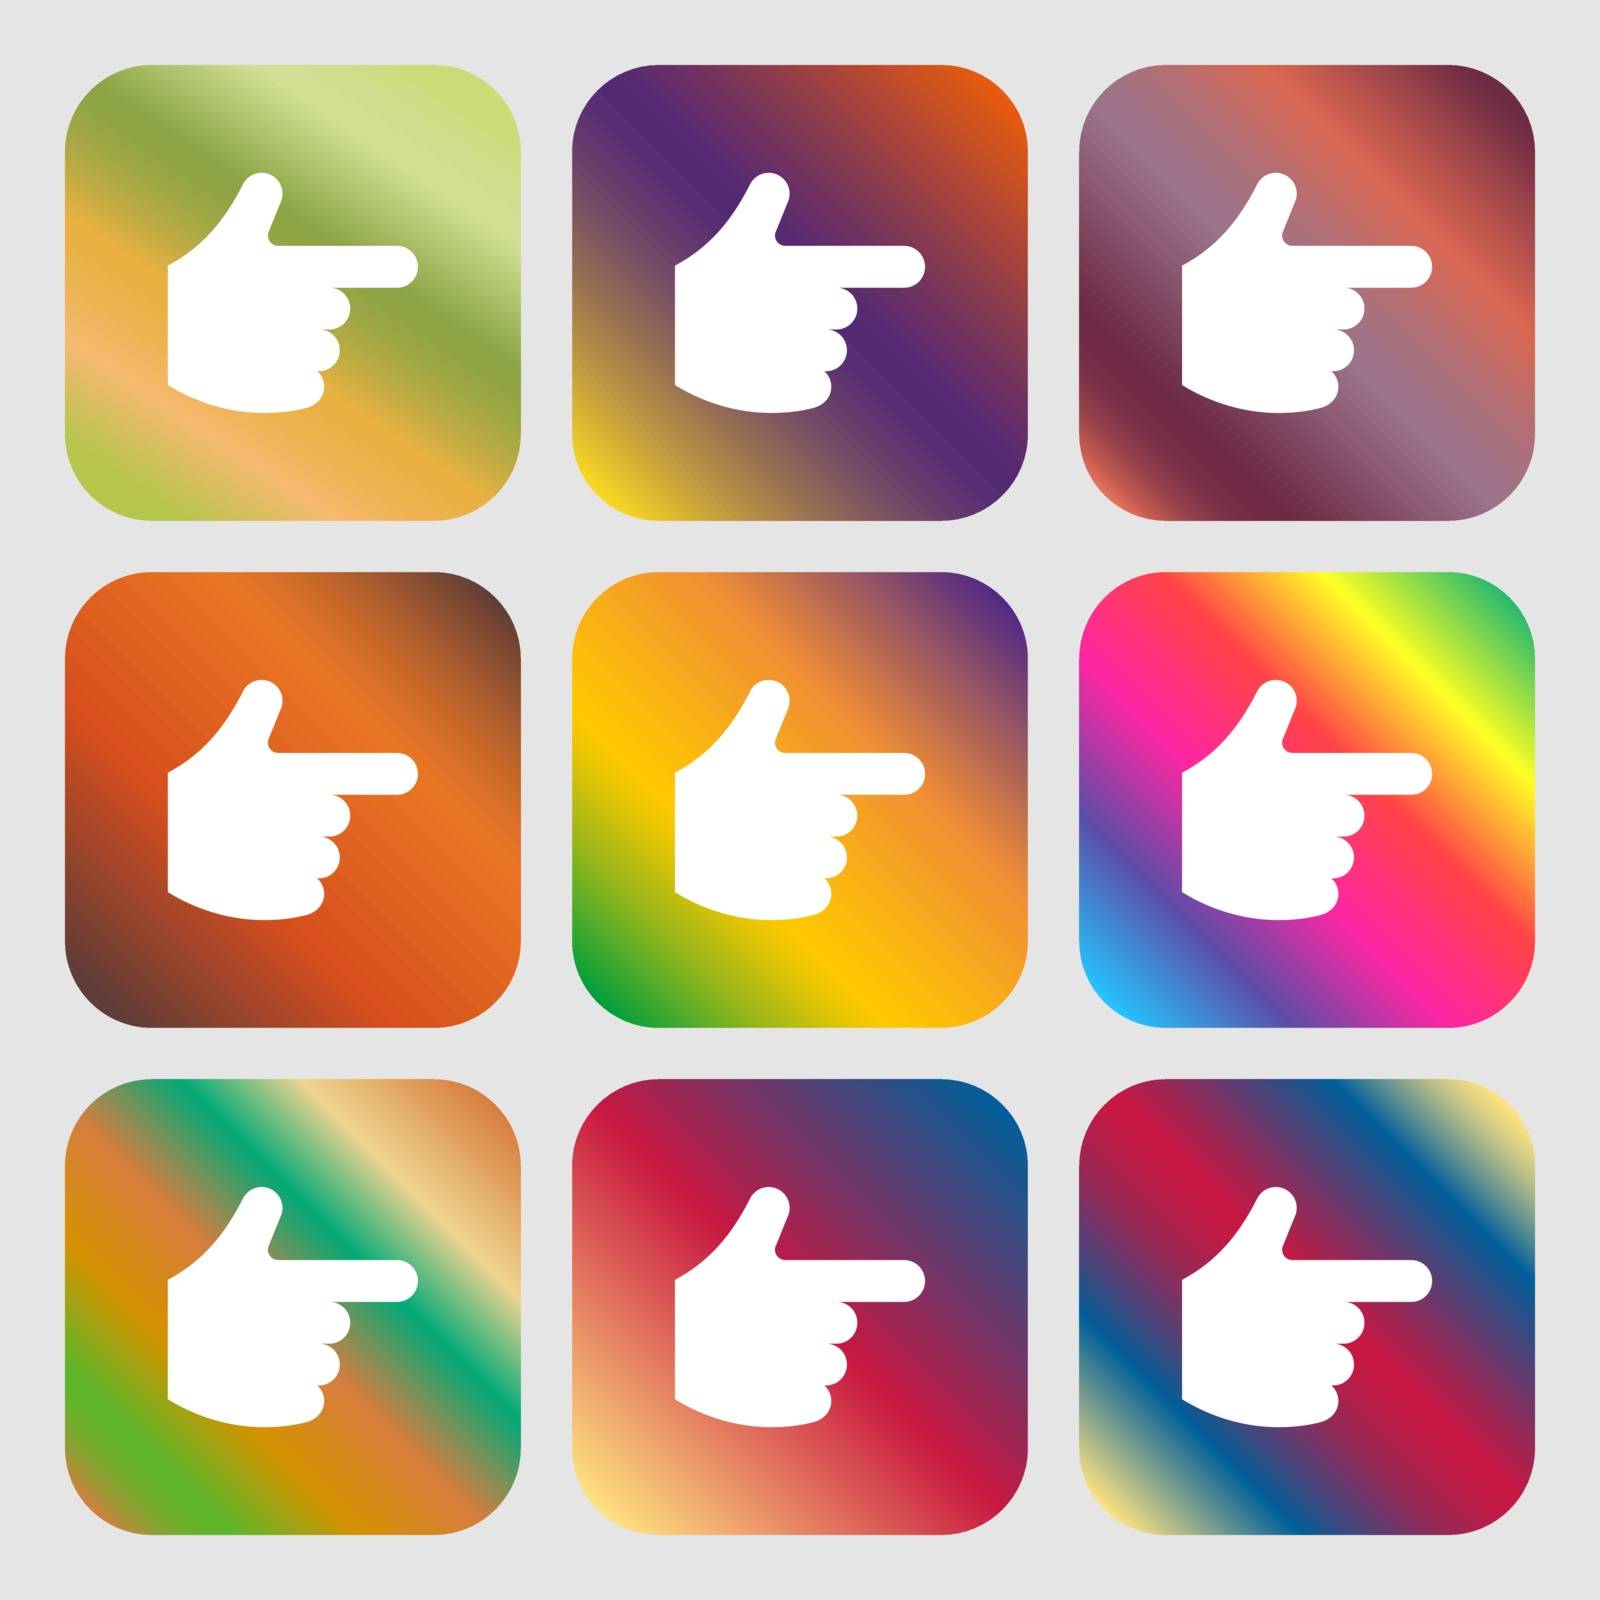 pointing hand icon. Nine buttons with bright gradients for beautiful design. Vector illustration